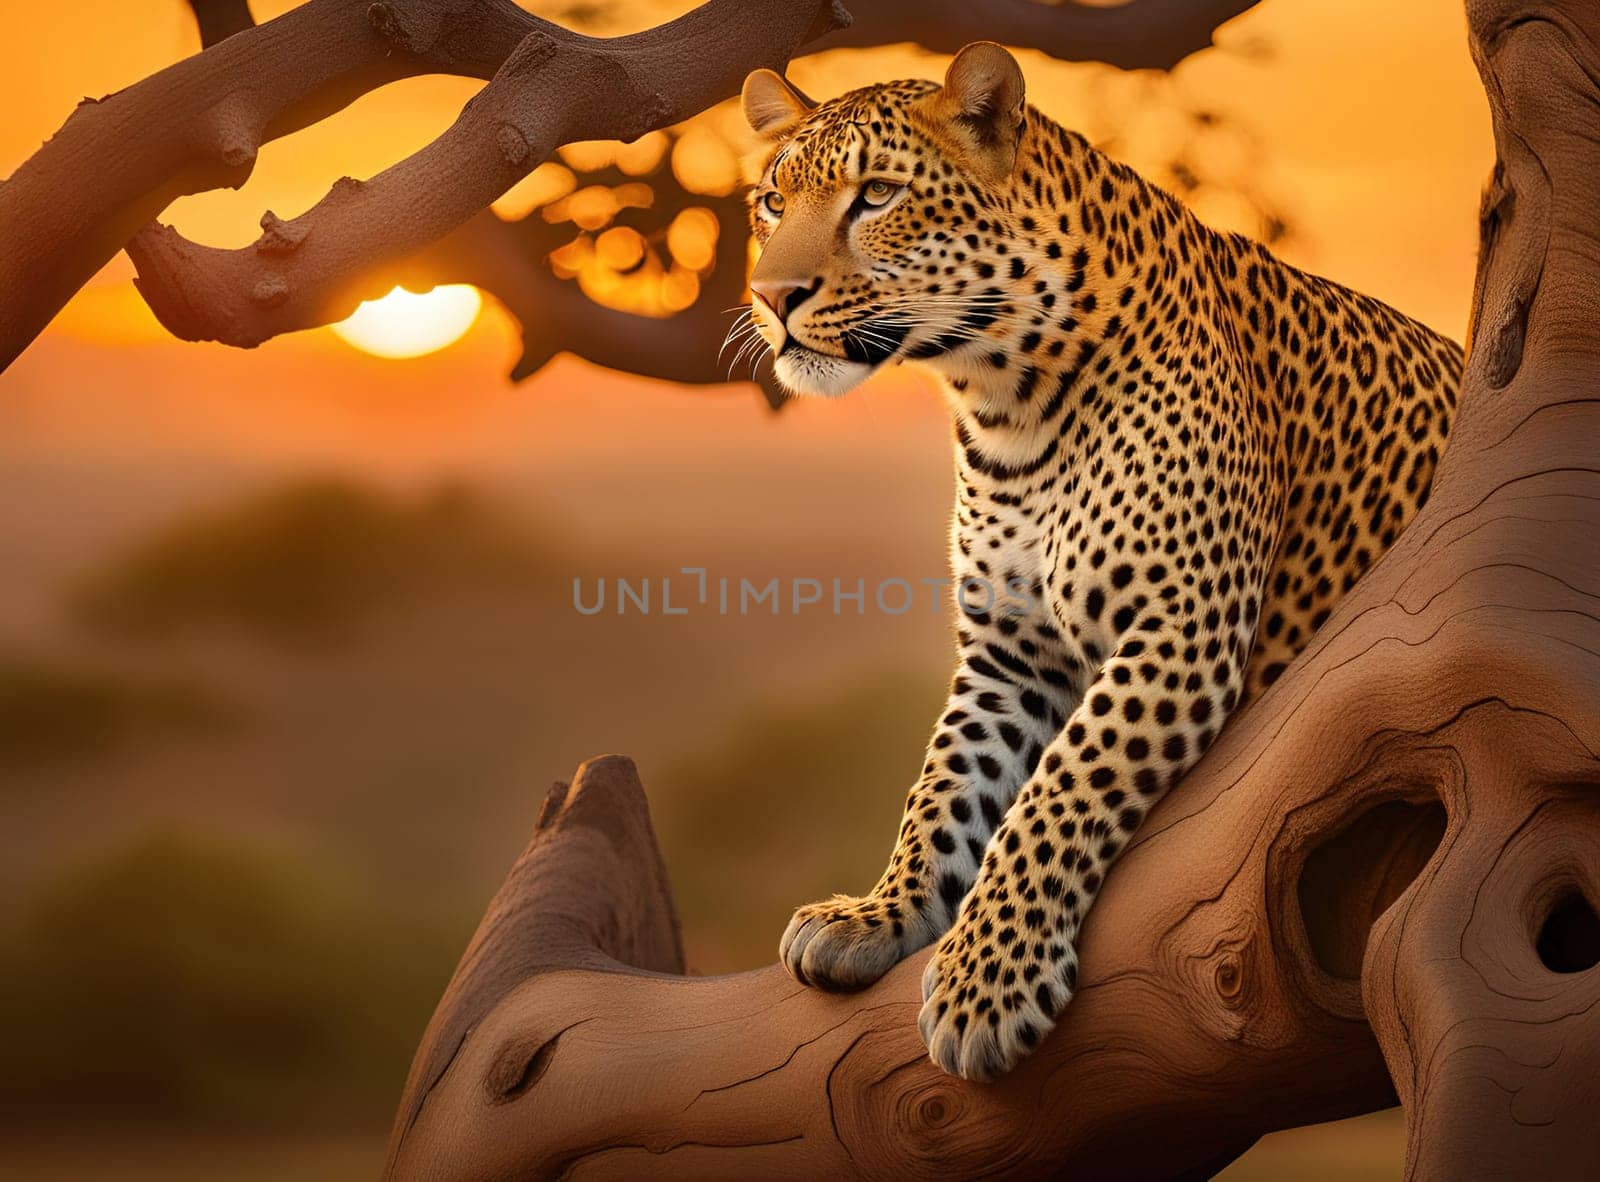 Leopard resting on a tree branch at sunset in the African savannah.Leopard sitting on a tree branch at sunset. Leopard lying on a tree branch in the sunset light. Animal portrait.Leopard sitting on a tree trunk at sunset. African wildlife.